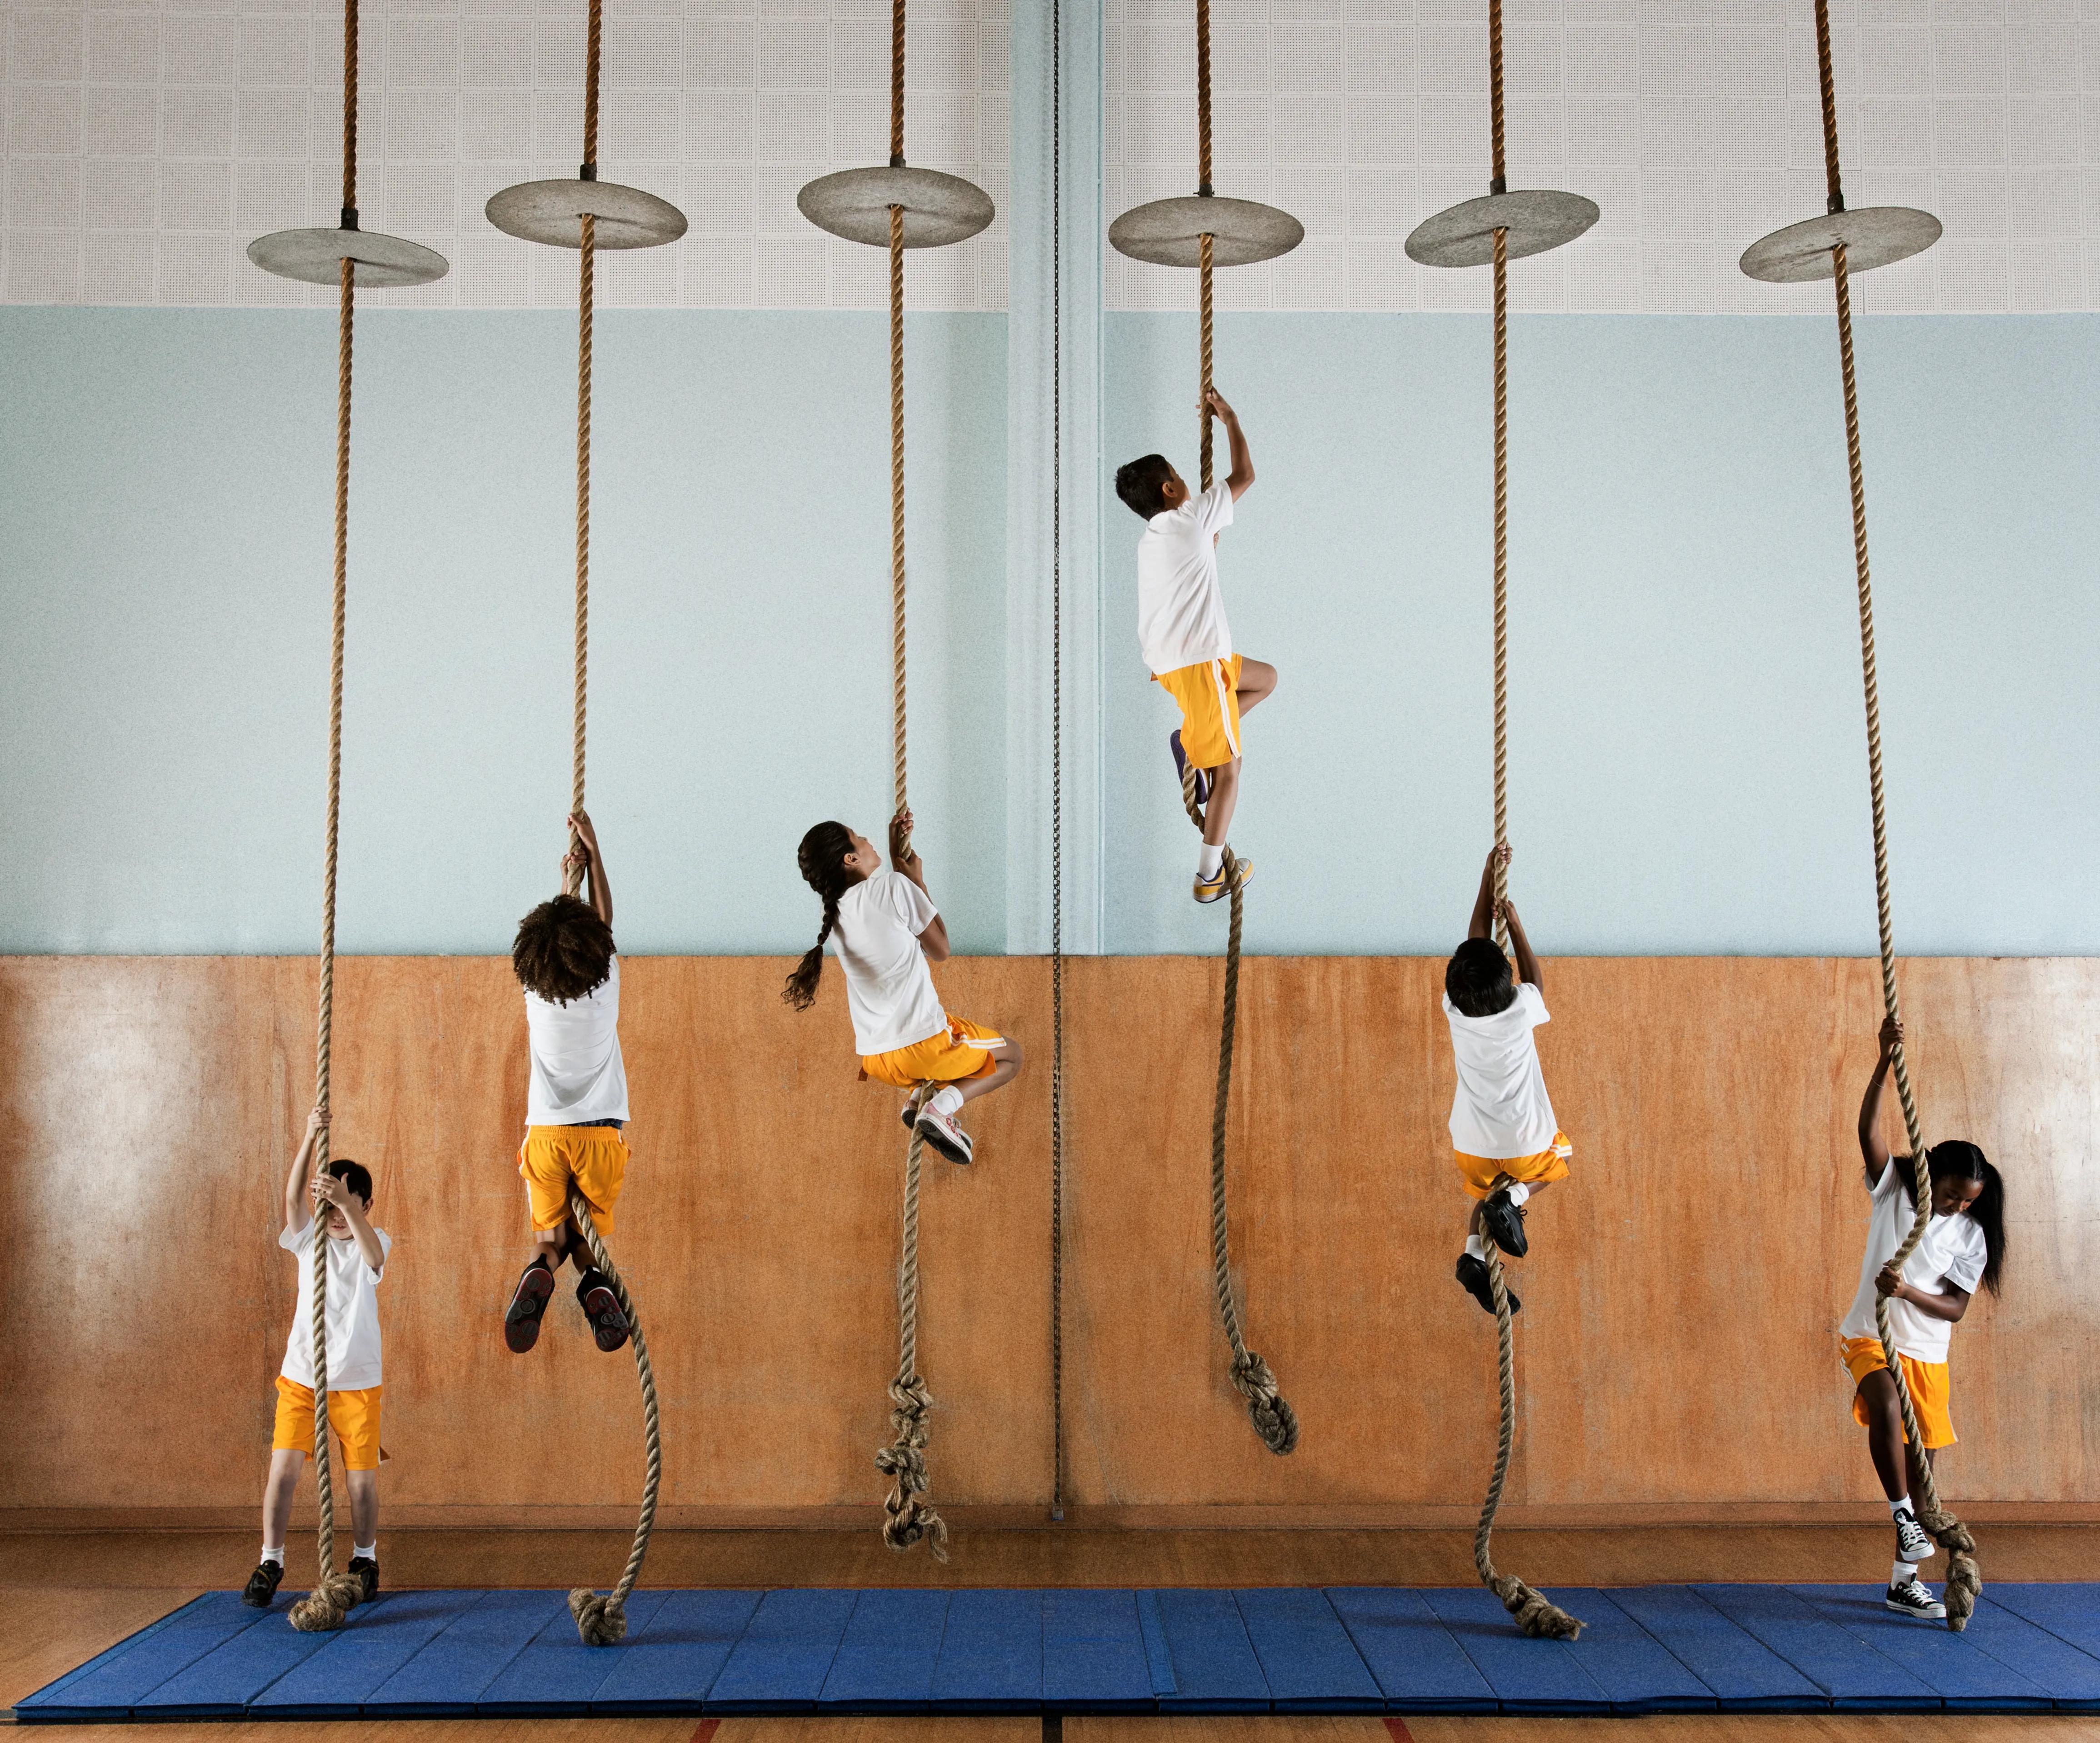 The power of play: How organized sports shape a child's development